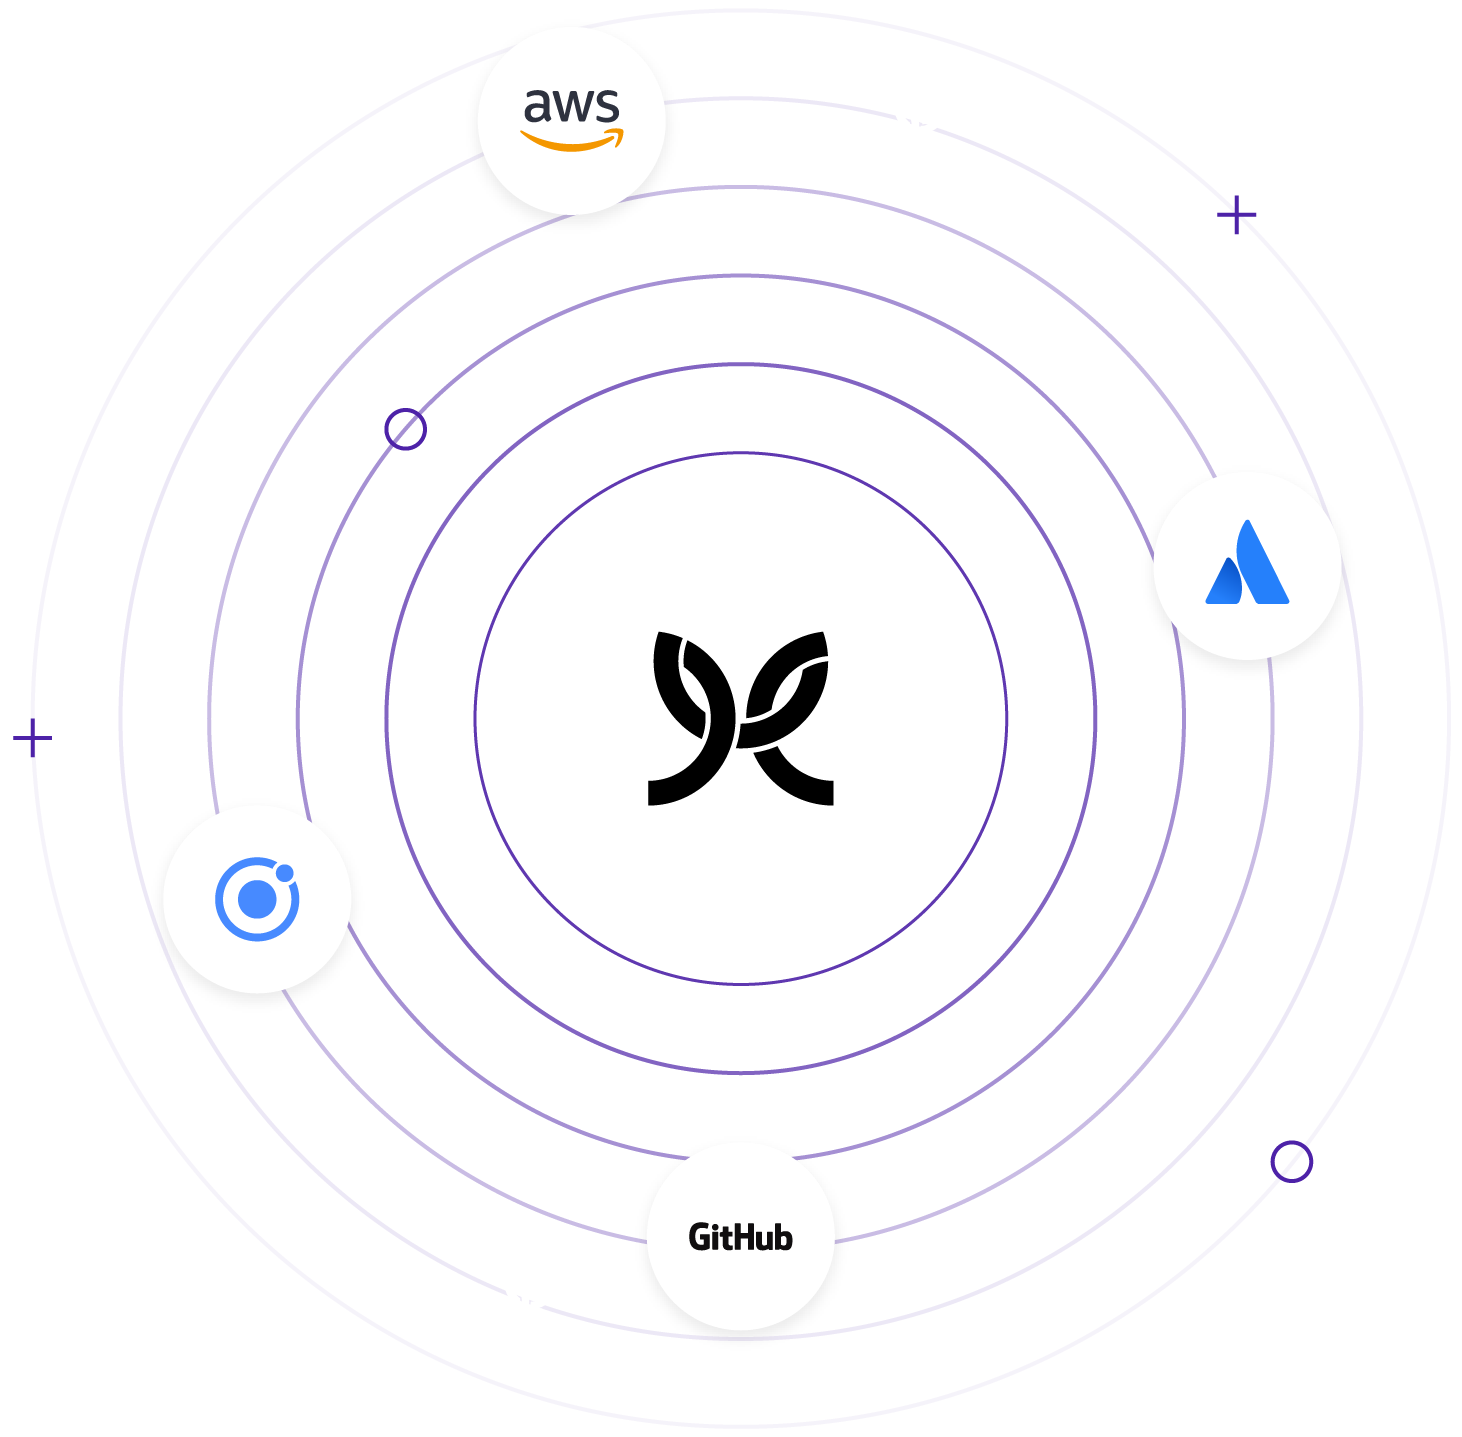 An image showing logos from Modus Create's partnerships including those with Amazon AWS, Github, and Atlassian